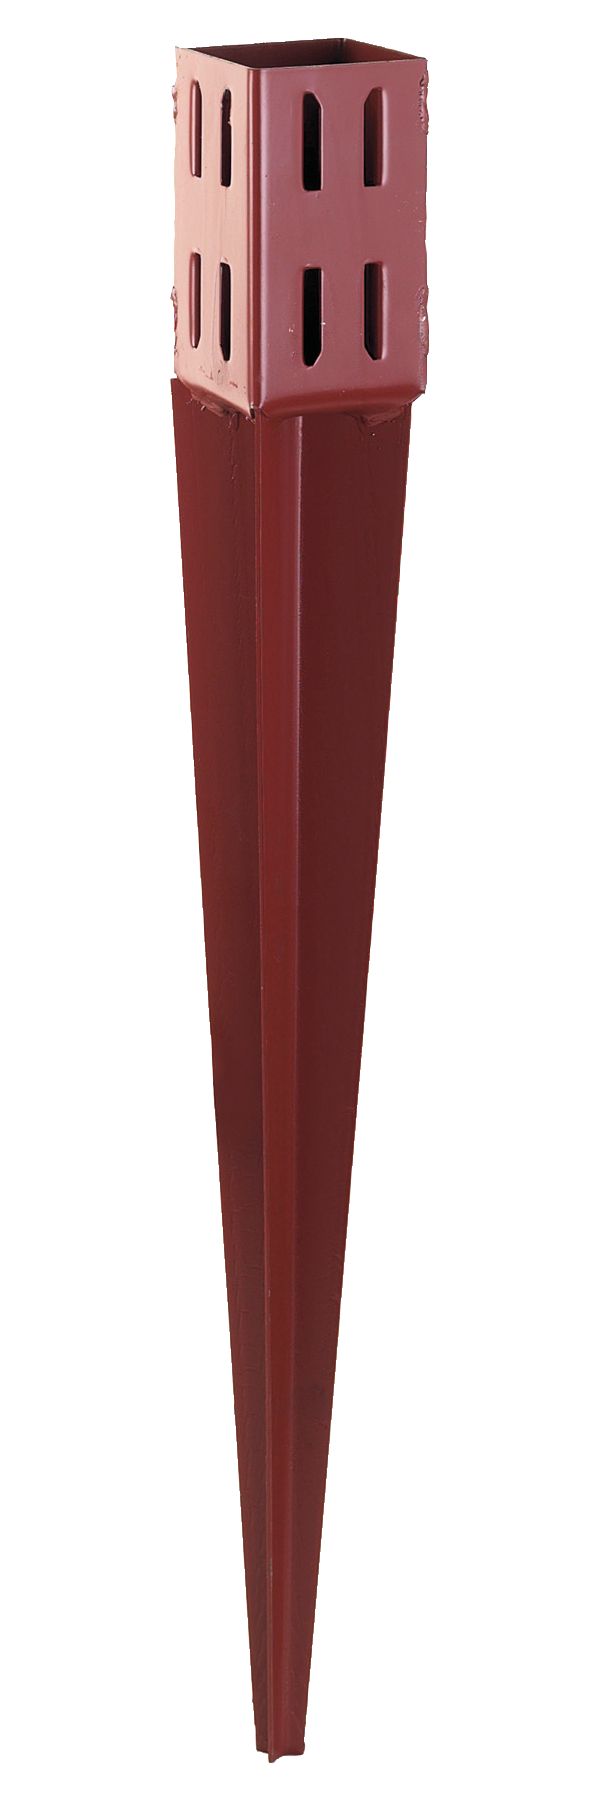 Image of Wickes Wedge 750mm Support Spike For Fence Posts - 75 x 75mm